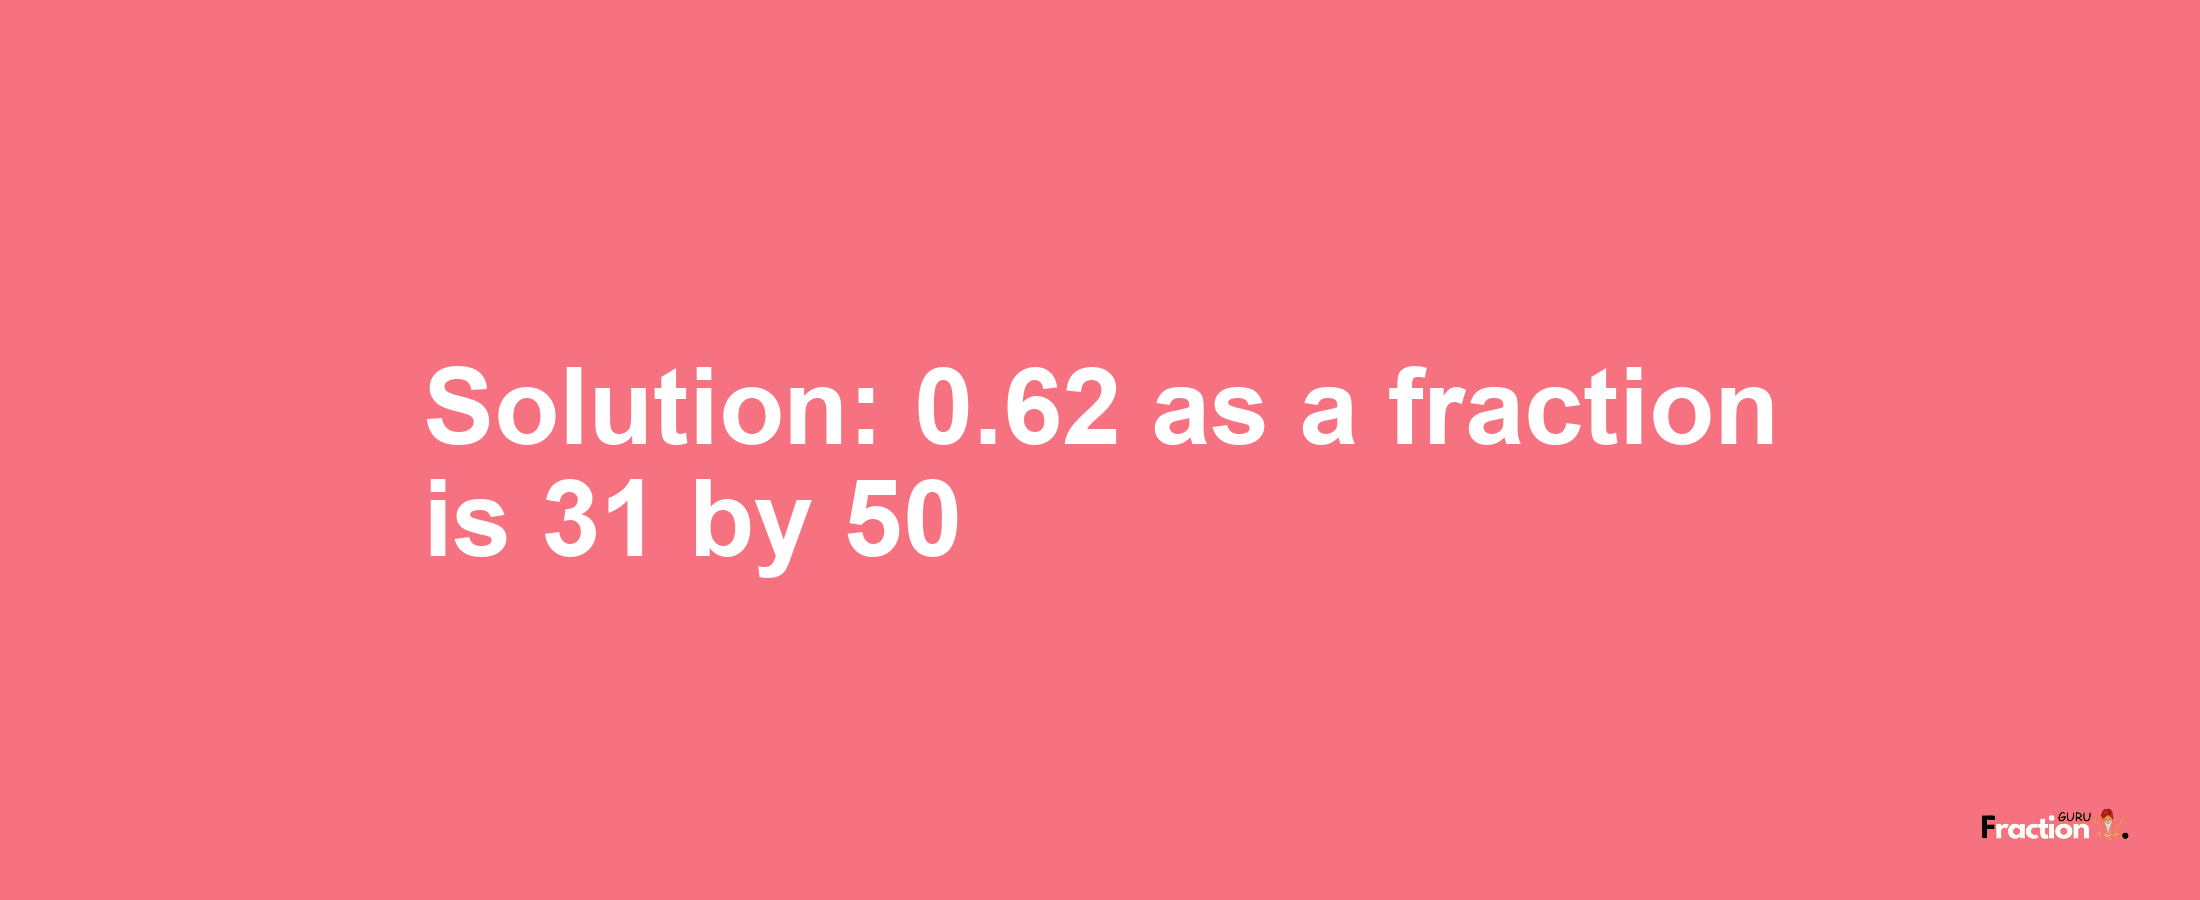 Solution:0.62 as a fraction is 31/50